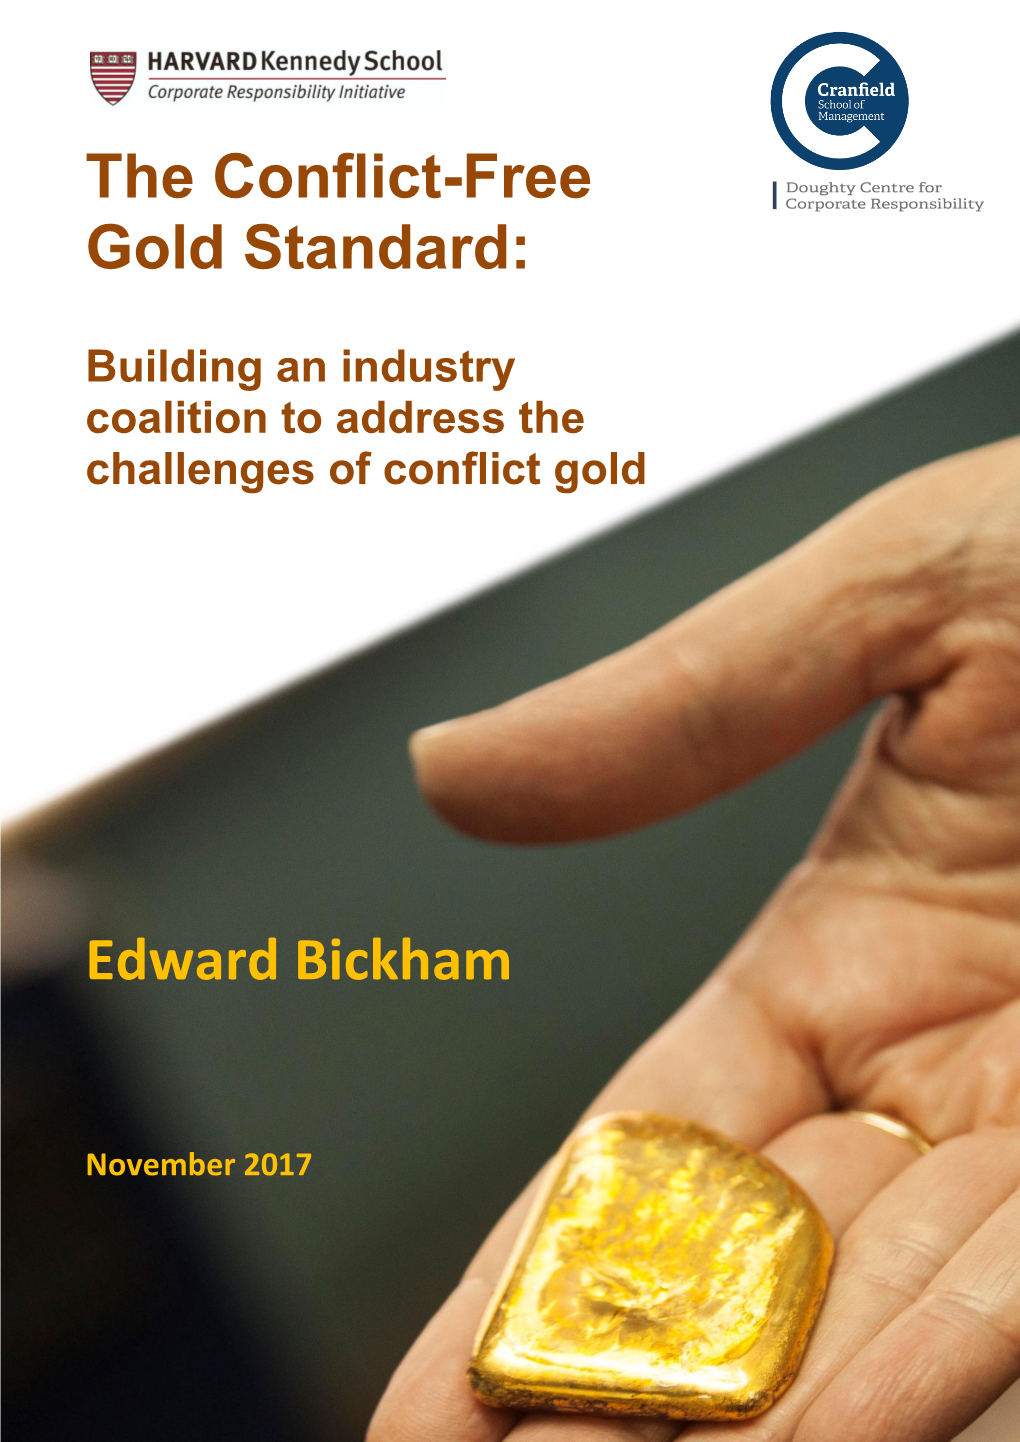 The Conflict-Free Gold Standard: Building an Industry Coalition to Address the Challenges of Conflict Gold